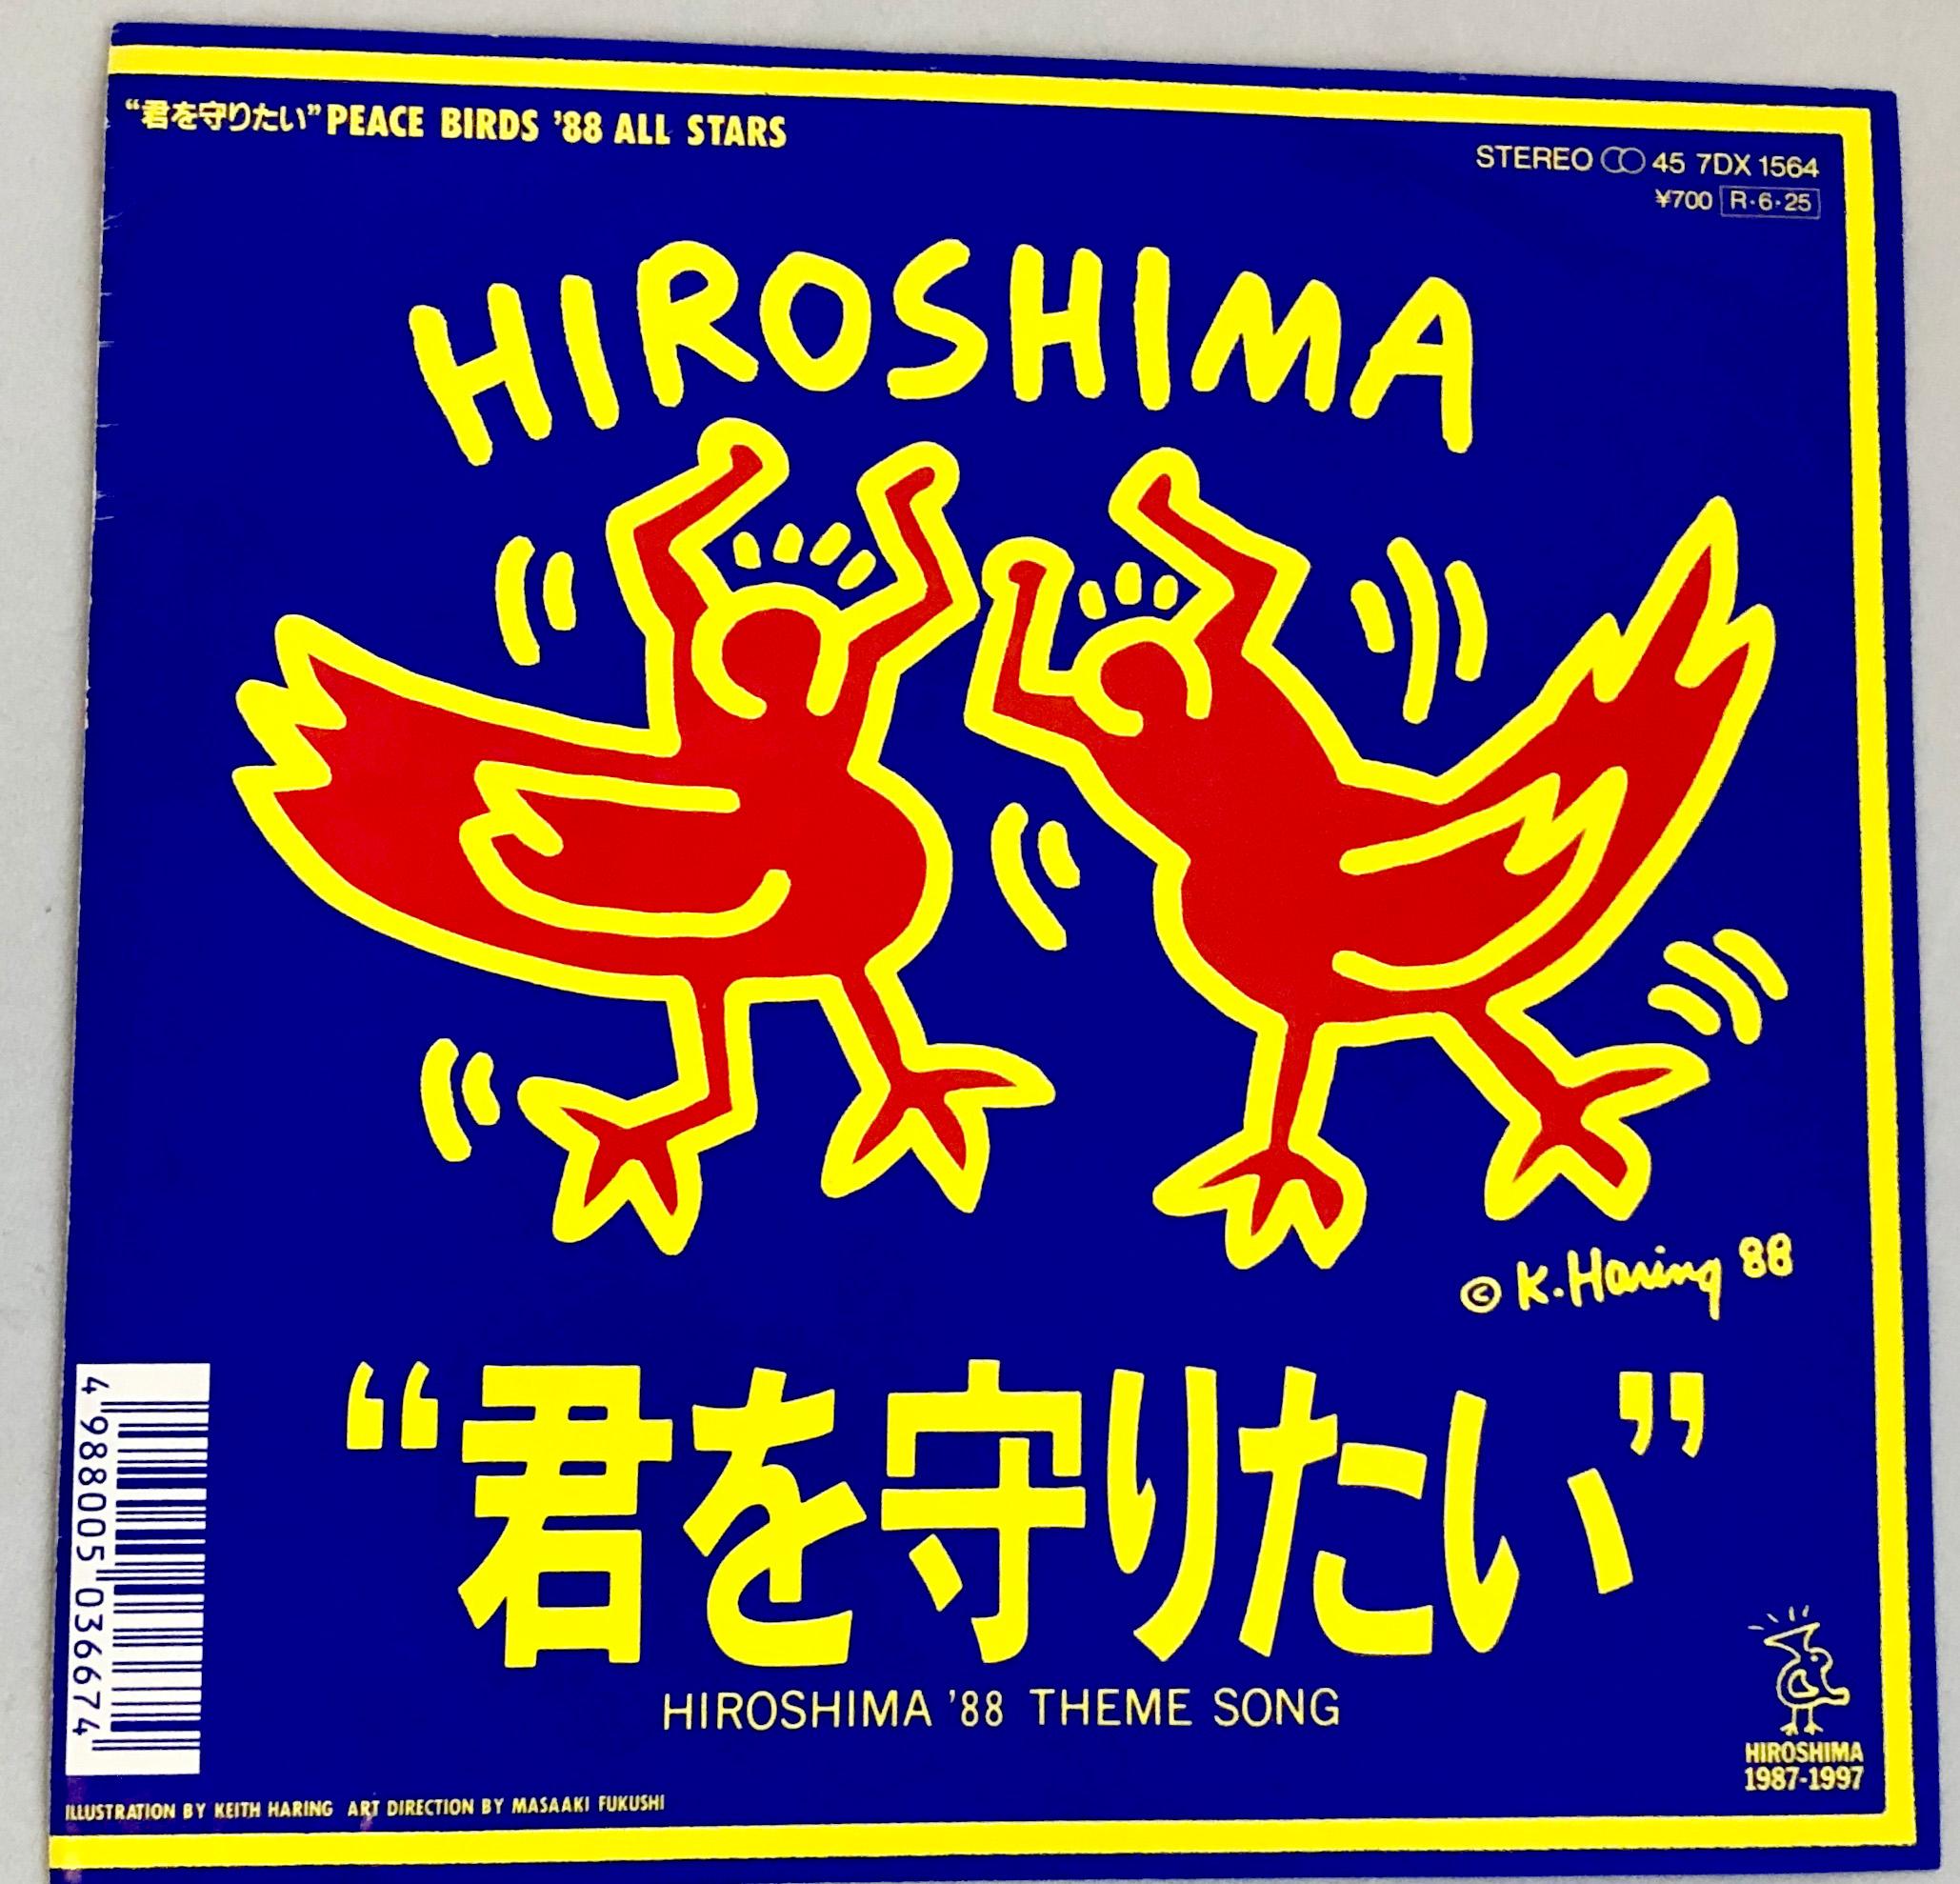 Keith Haring Hiroshima 1988
Rare 1988 Japanese vinyl record featuring original artwork by Keith Haring. Truly vibrant colors that make for stand-out wall art and unique vintage Keith Haring collectible. Rare and not to be passed upon. 

*1st